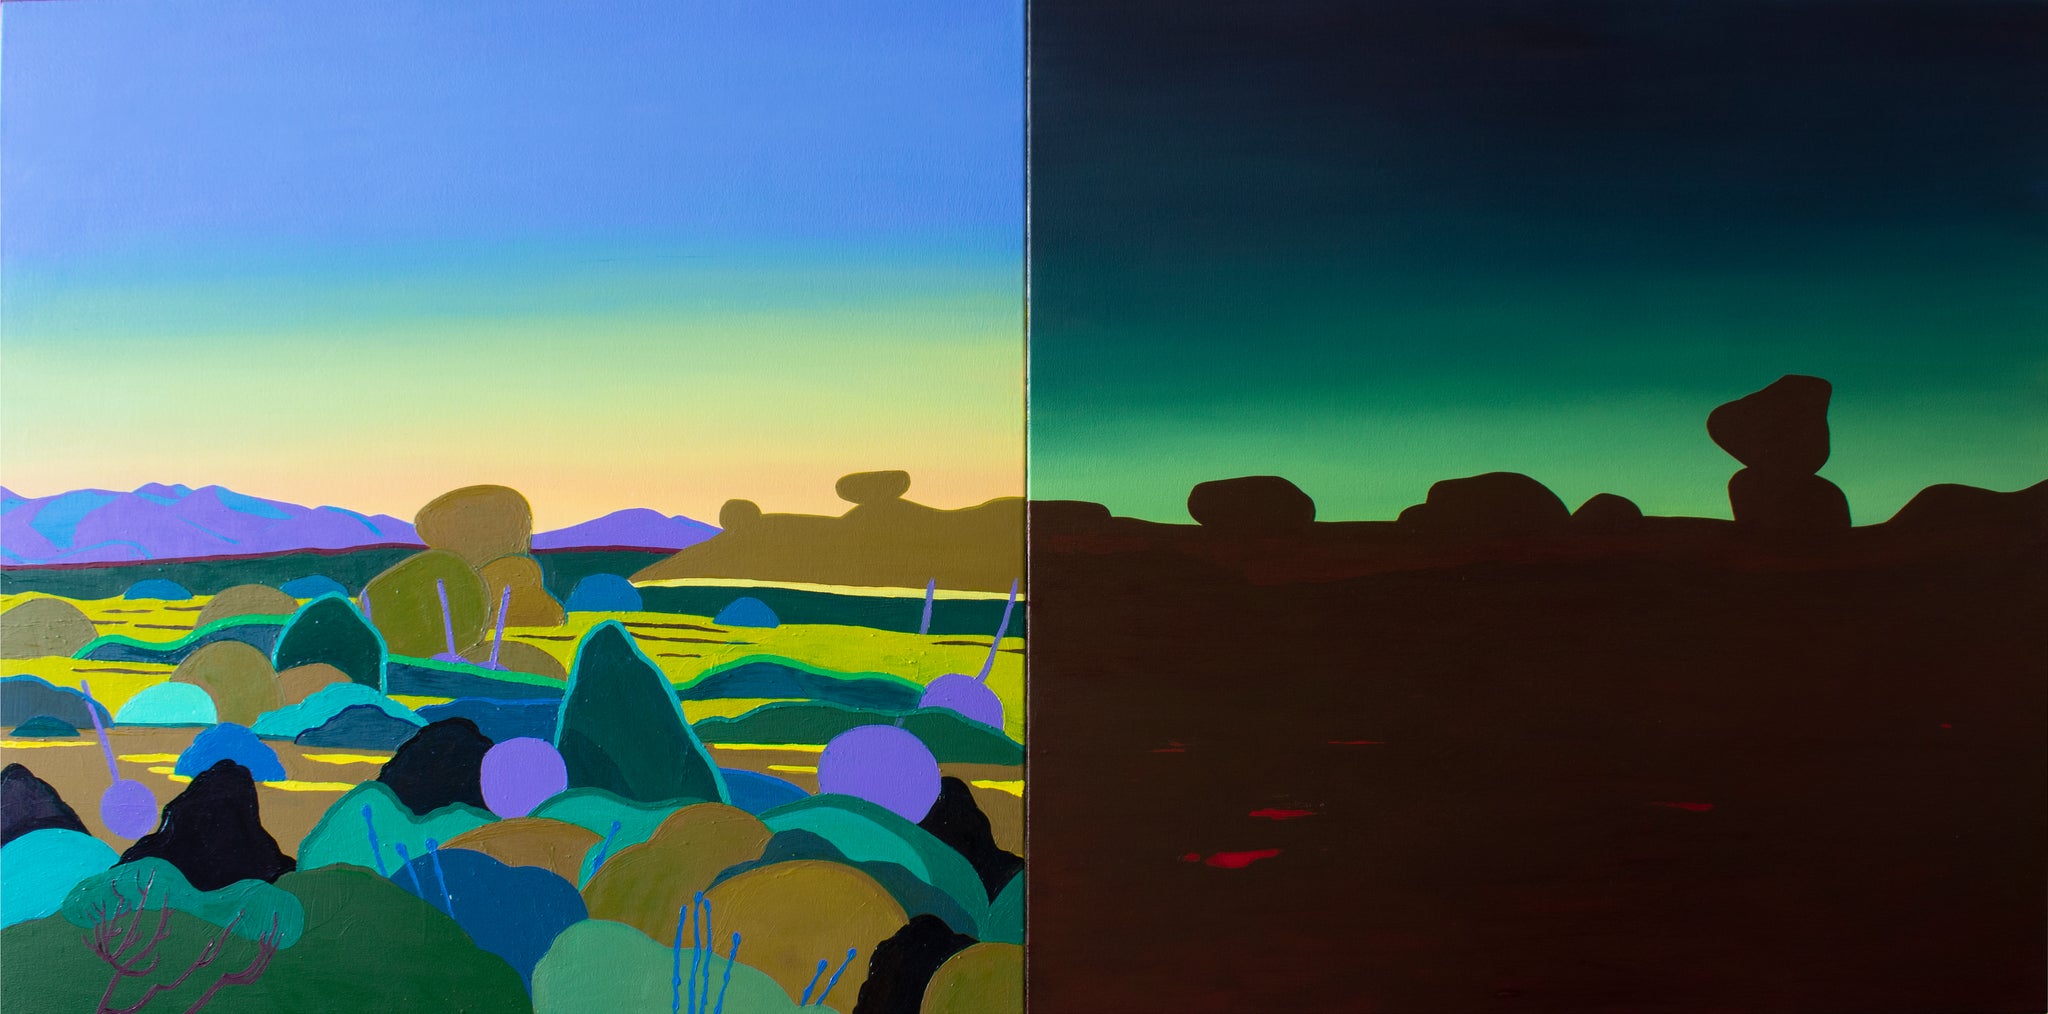 Erin Turner, "Day and Night"